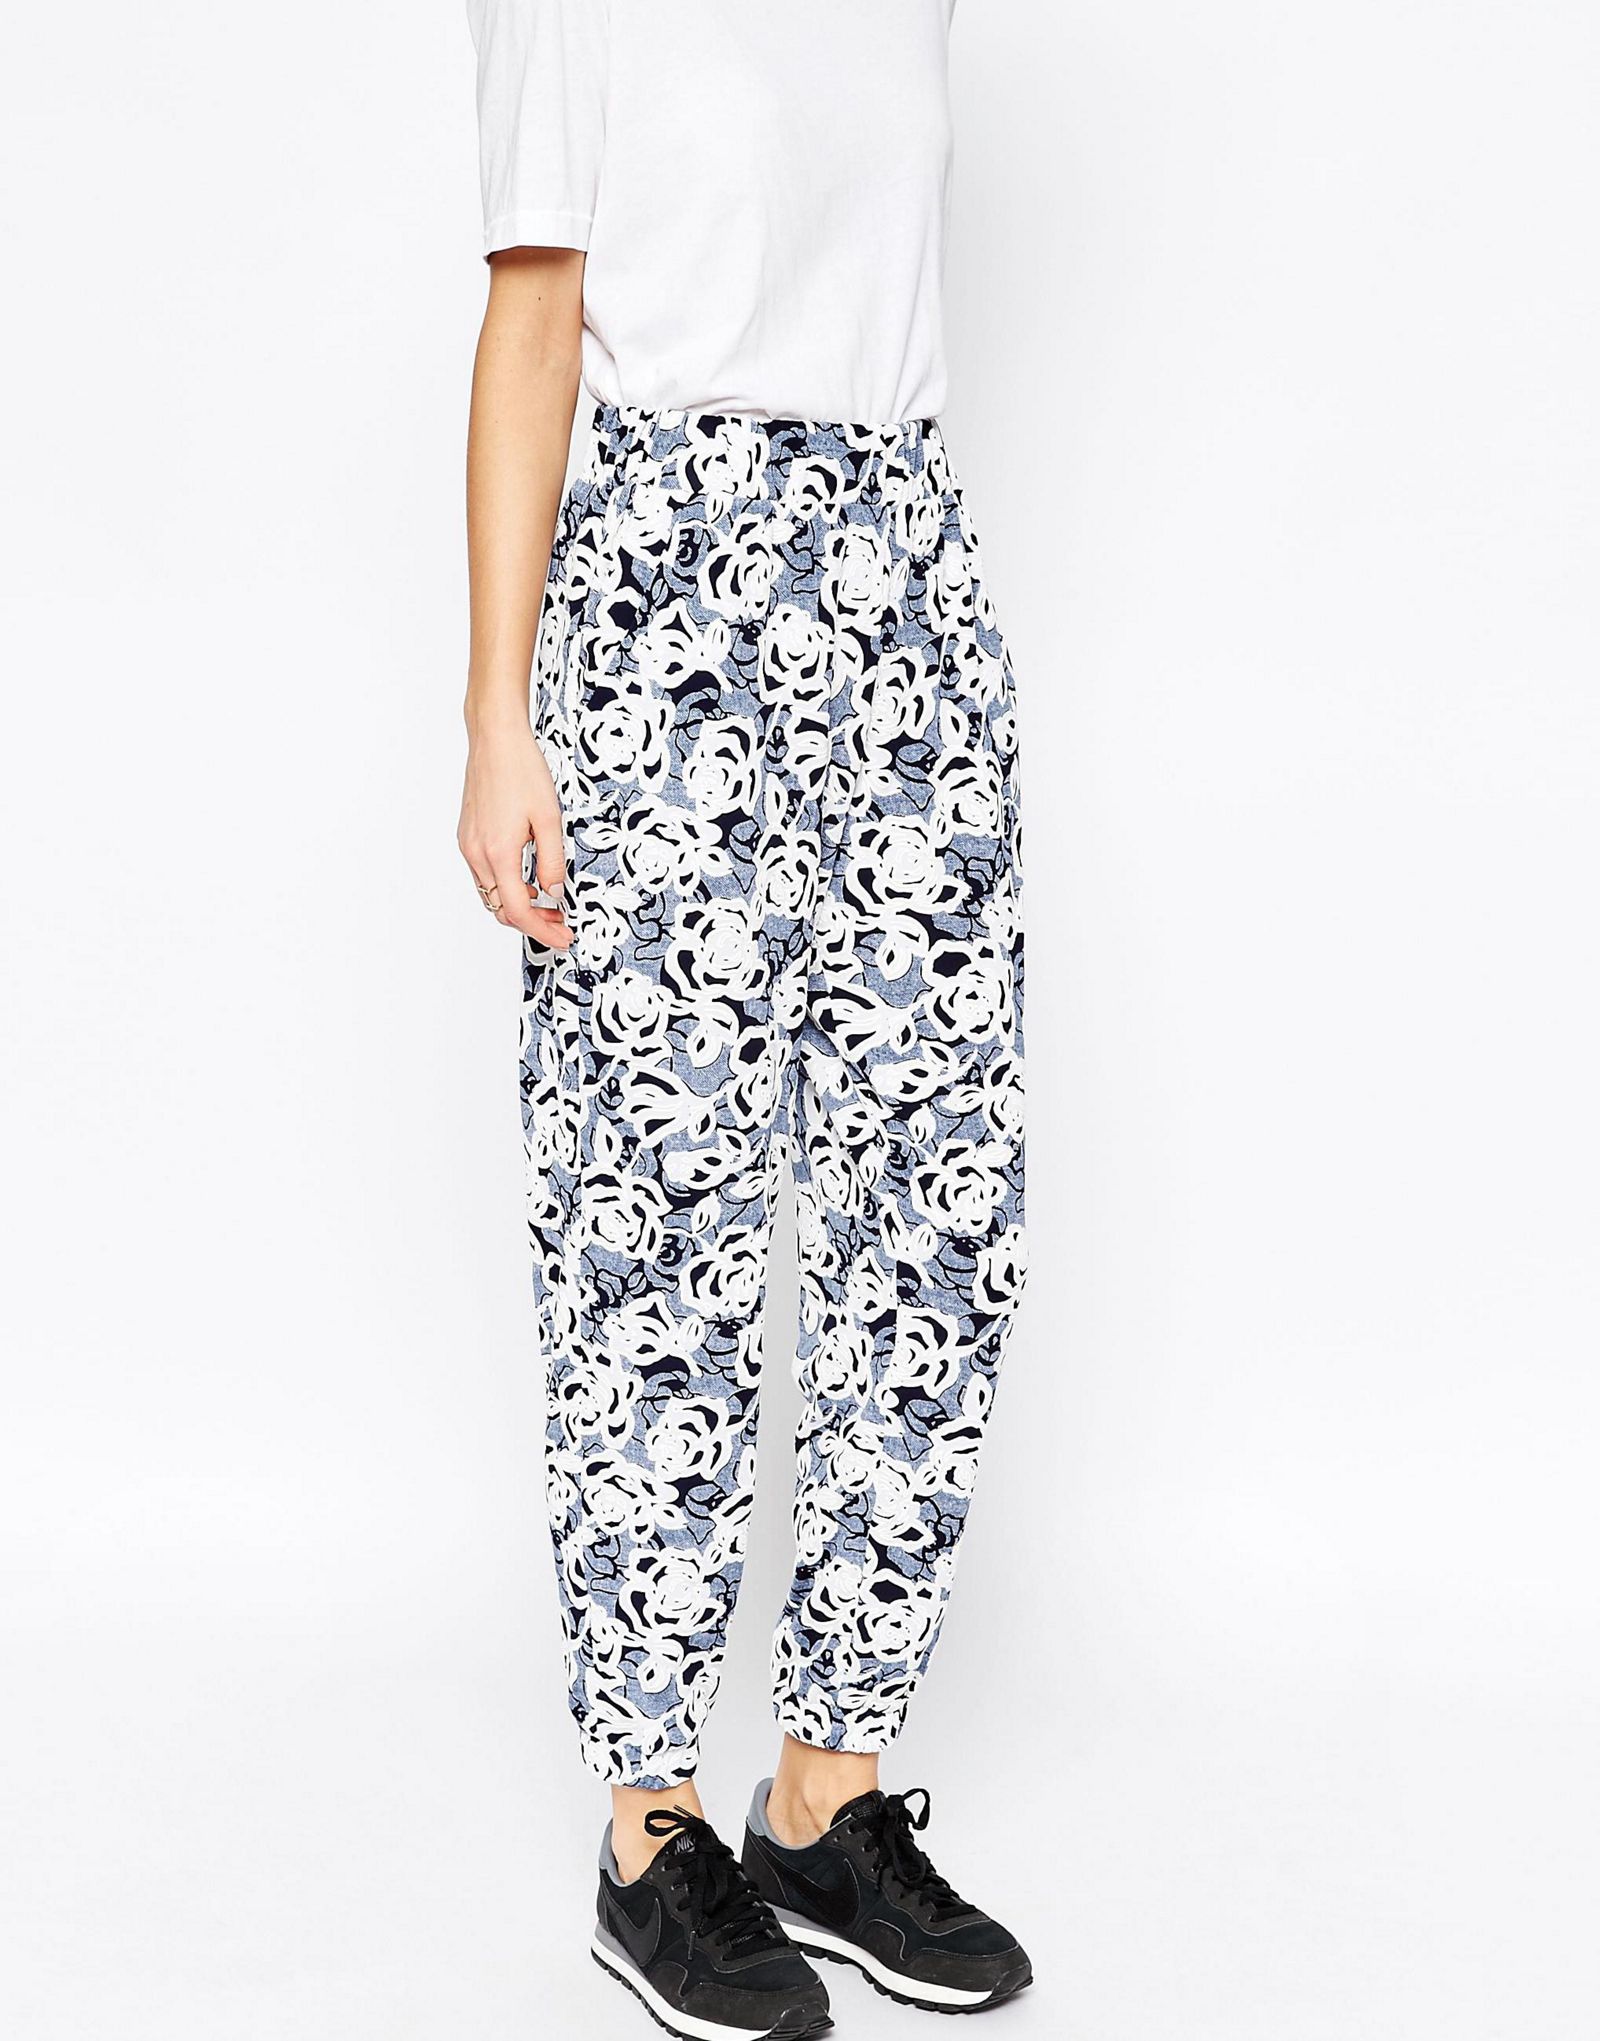 ASOS WHITE Denim Look Textured Floral Joggers